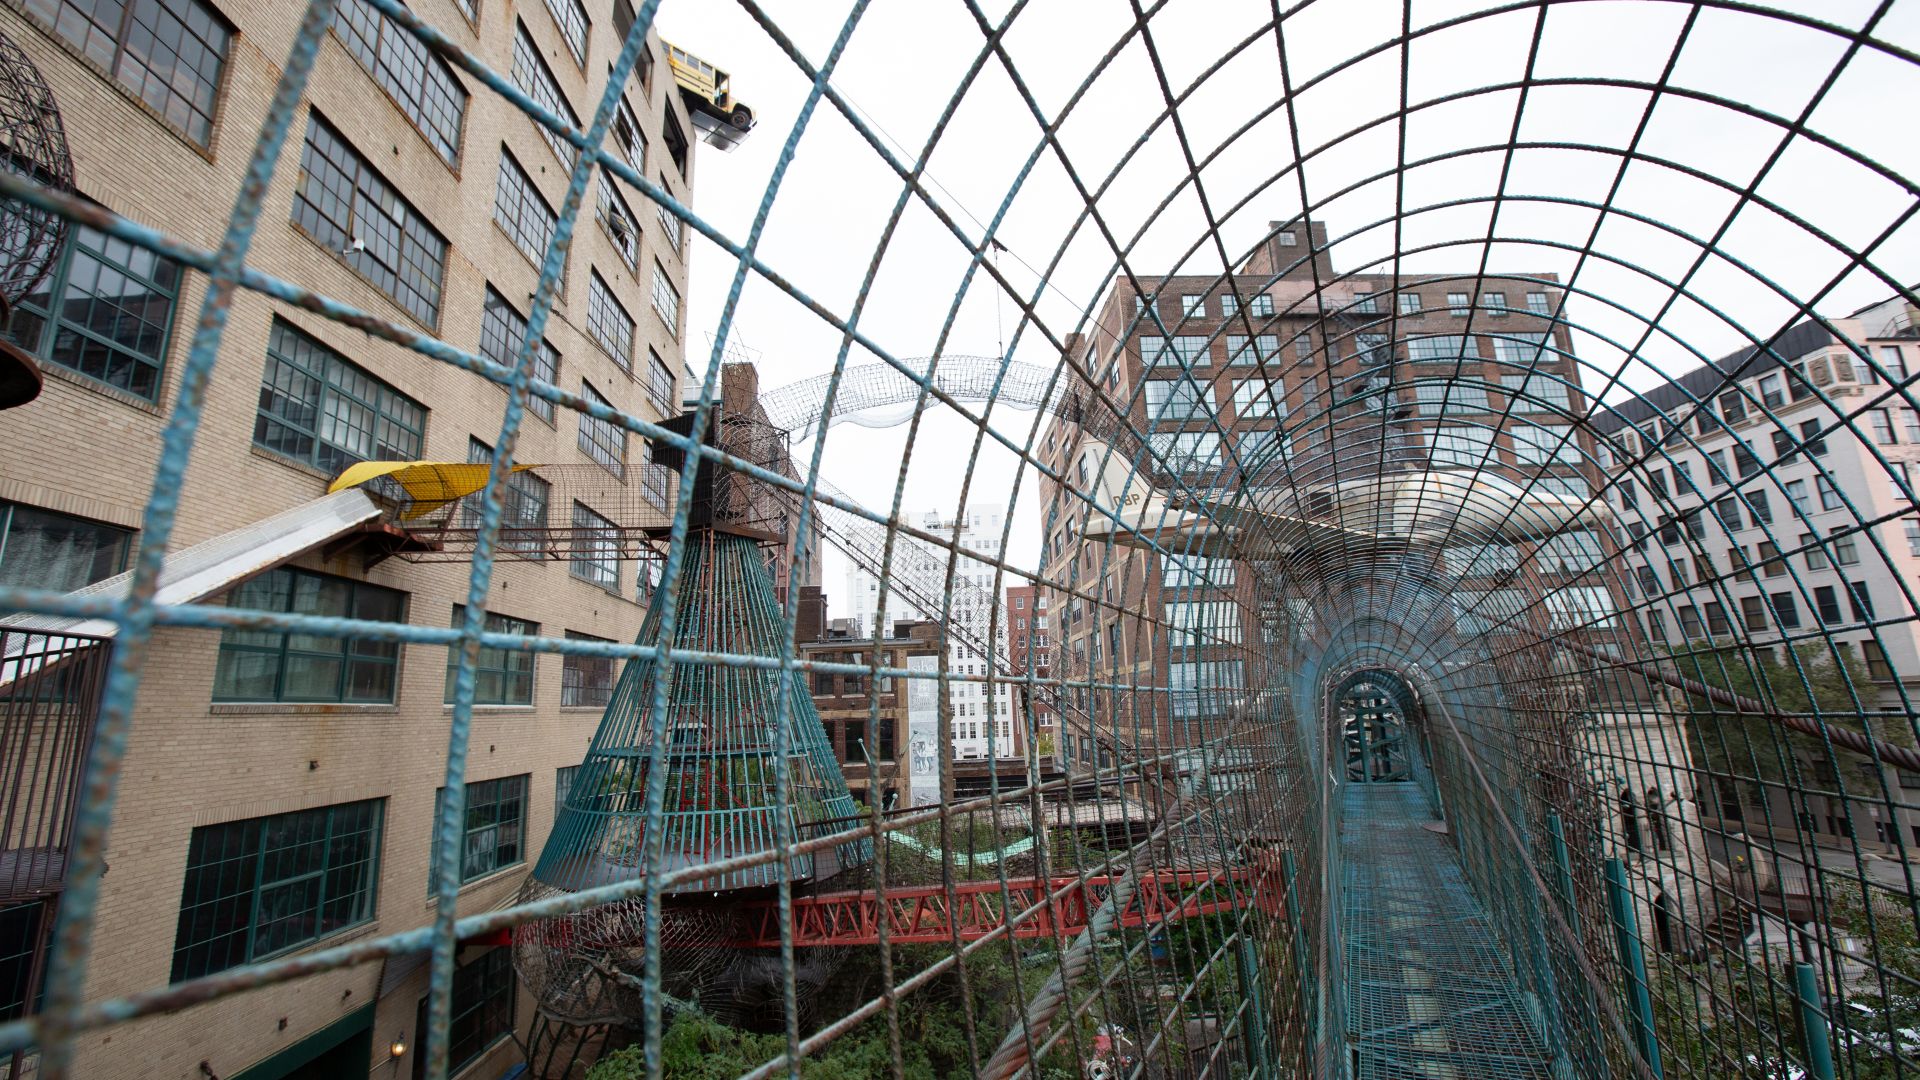 City Museum is an all-ages architectural playground in downtown St. Louis.